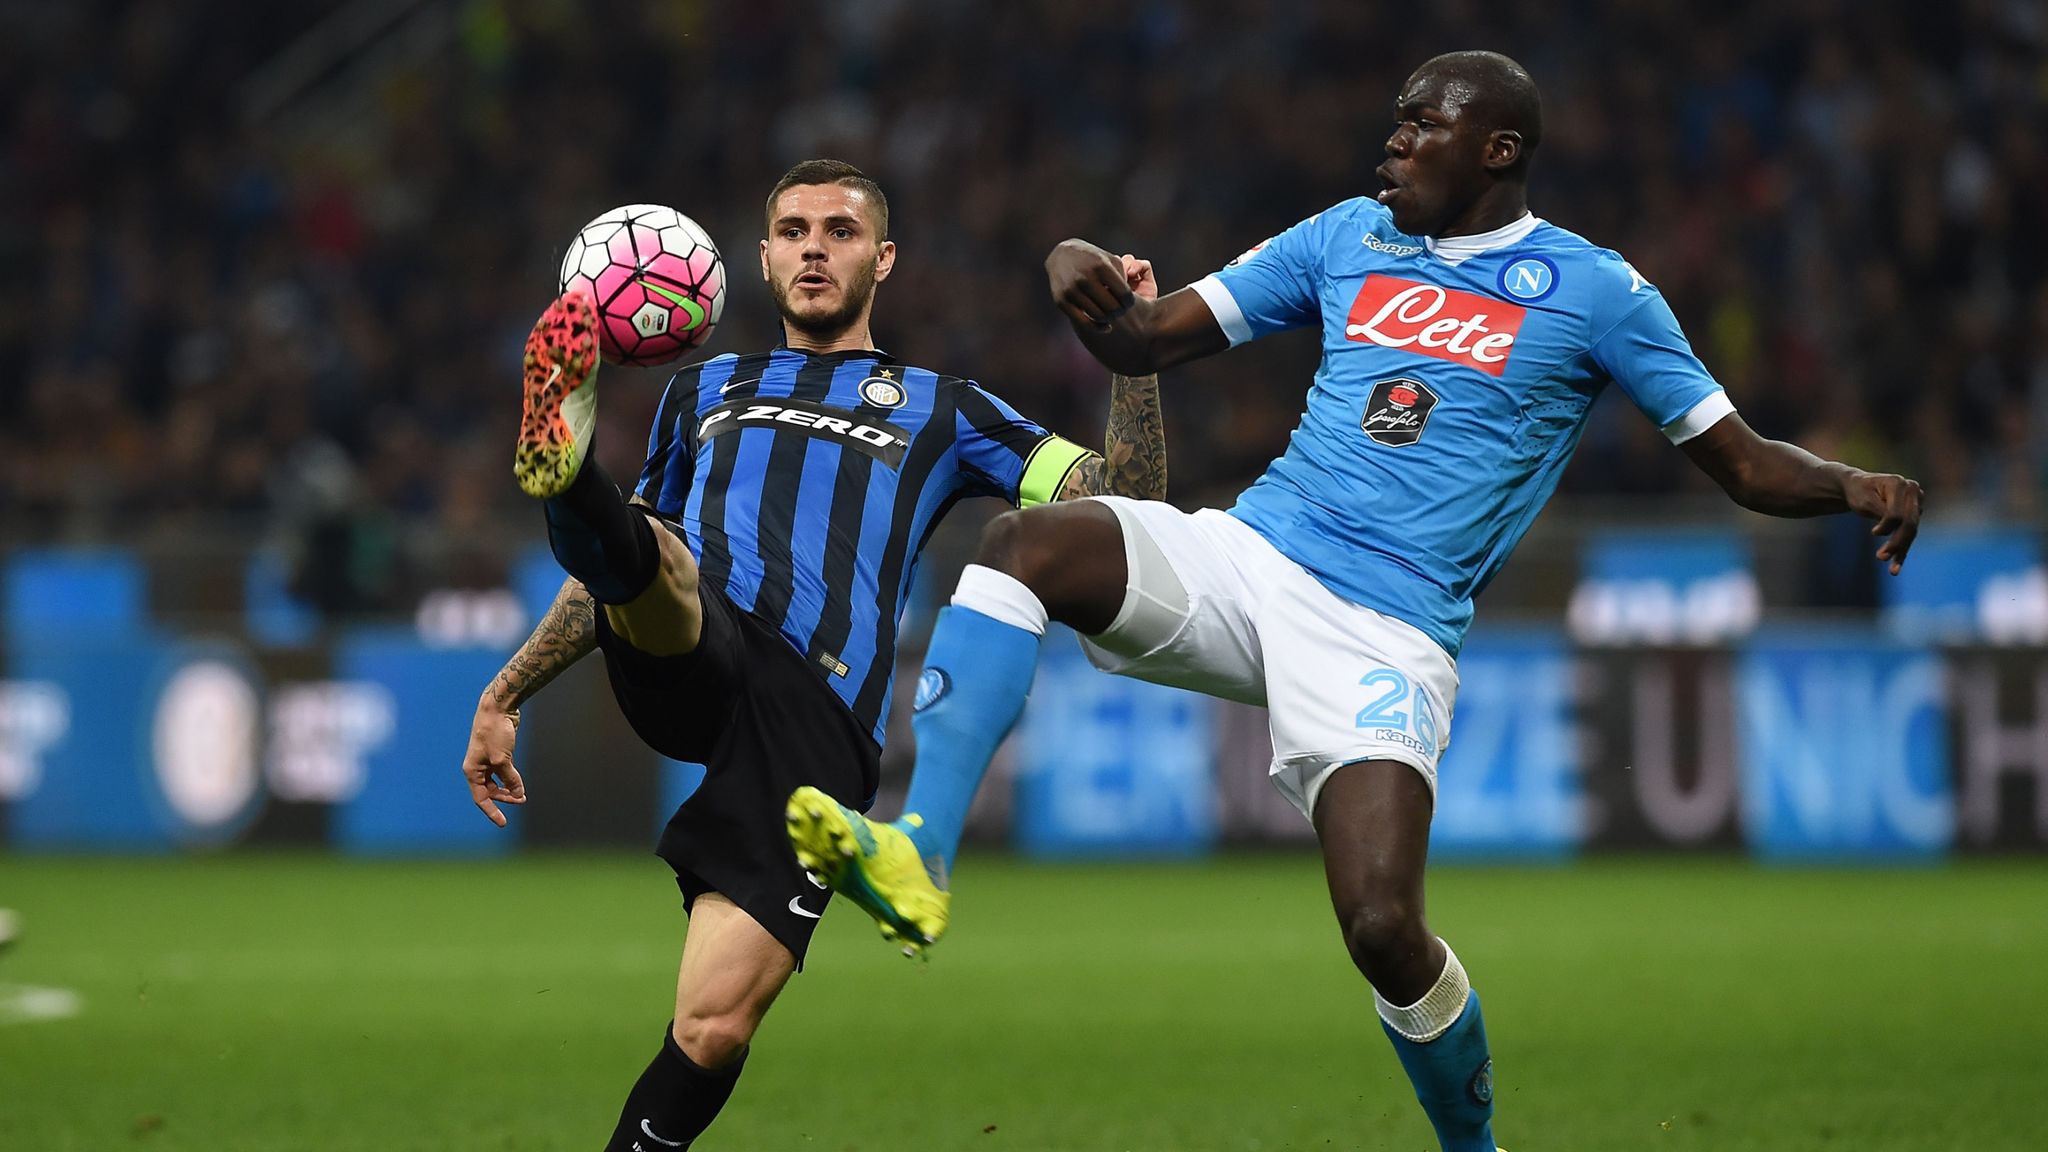 Chelsea 'want' to sign Kalidou Koulibaly from Napoli, says